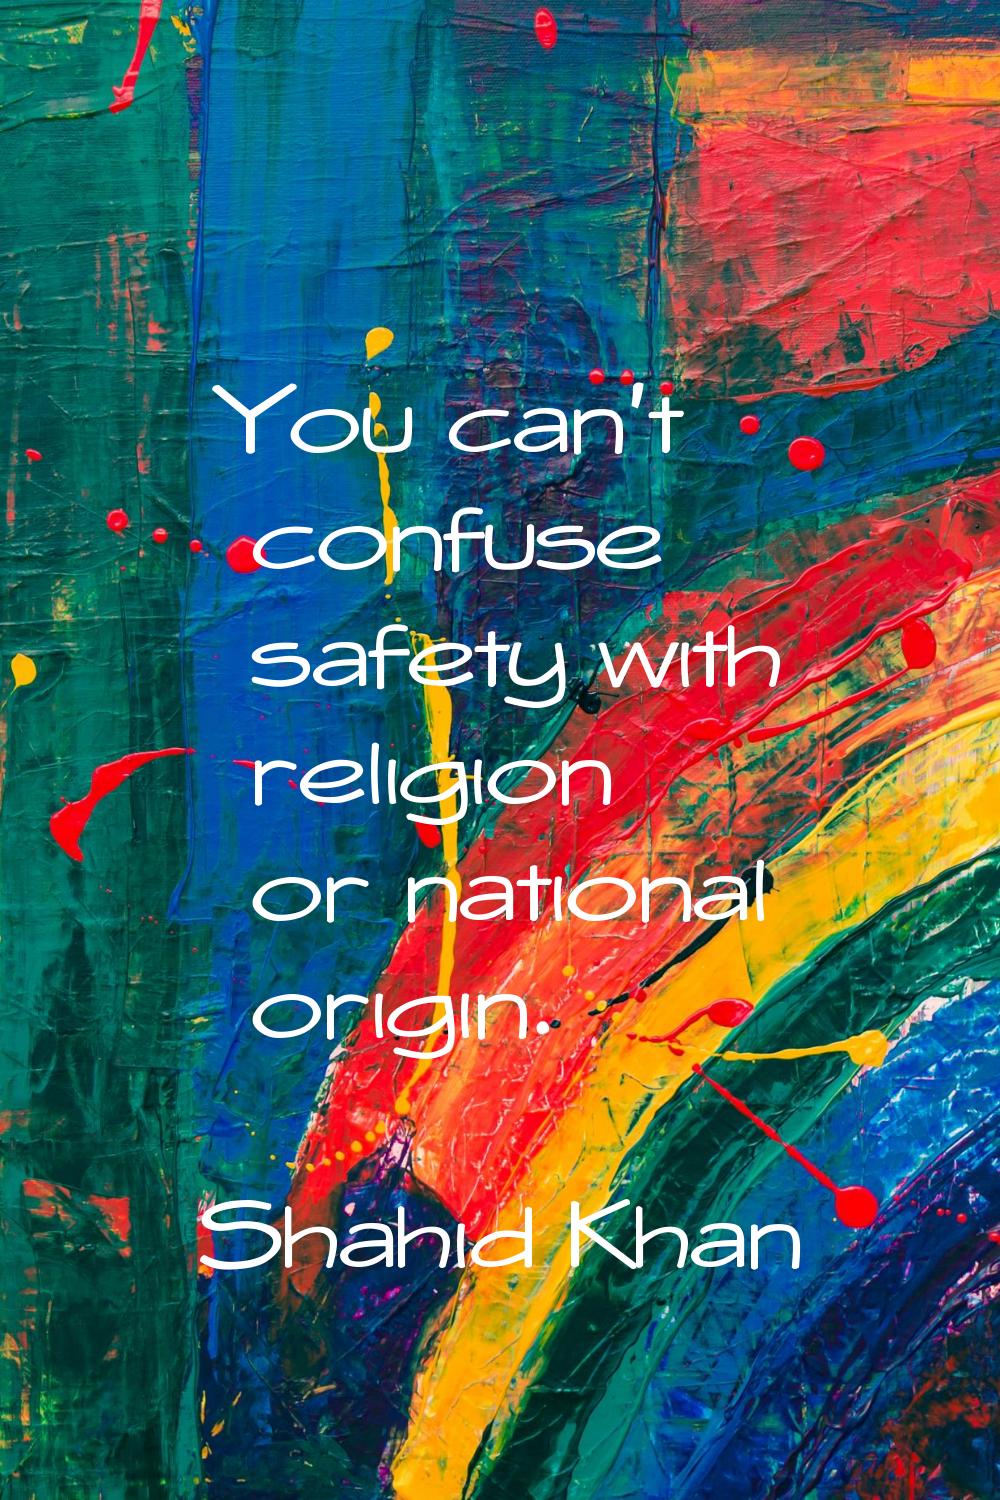 You can't confuse safety with religion or national origin.